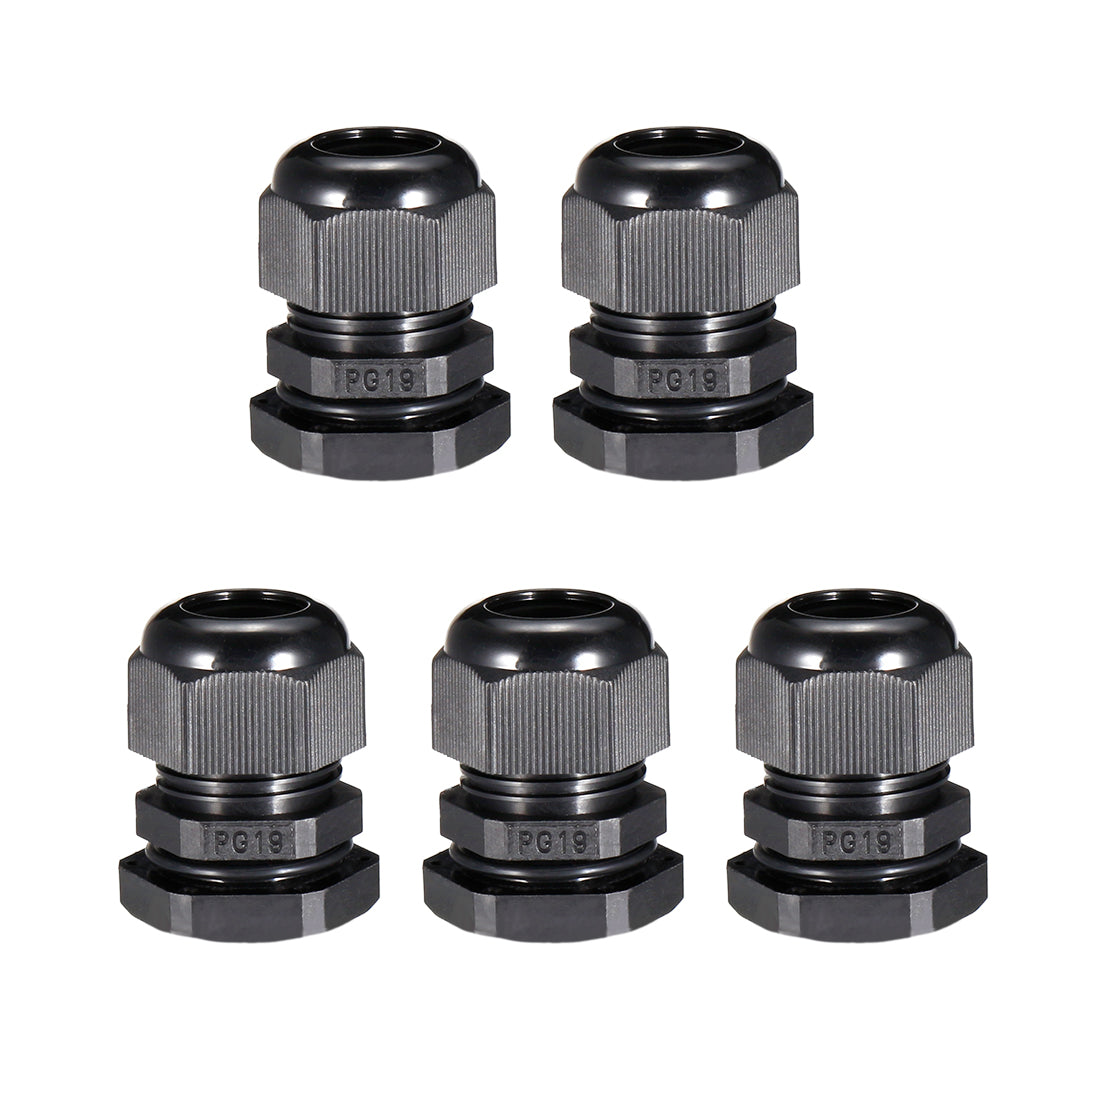 uxcell Uxcell 5Pcs PG19 Cable Gland Waterproof Plastic Joint Adjustable Locknut Black for 12mm-15mm Dia Cable Wire